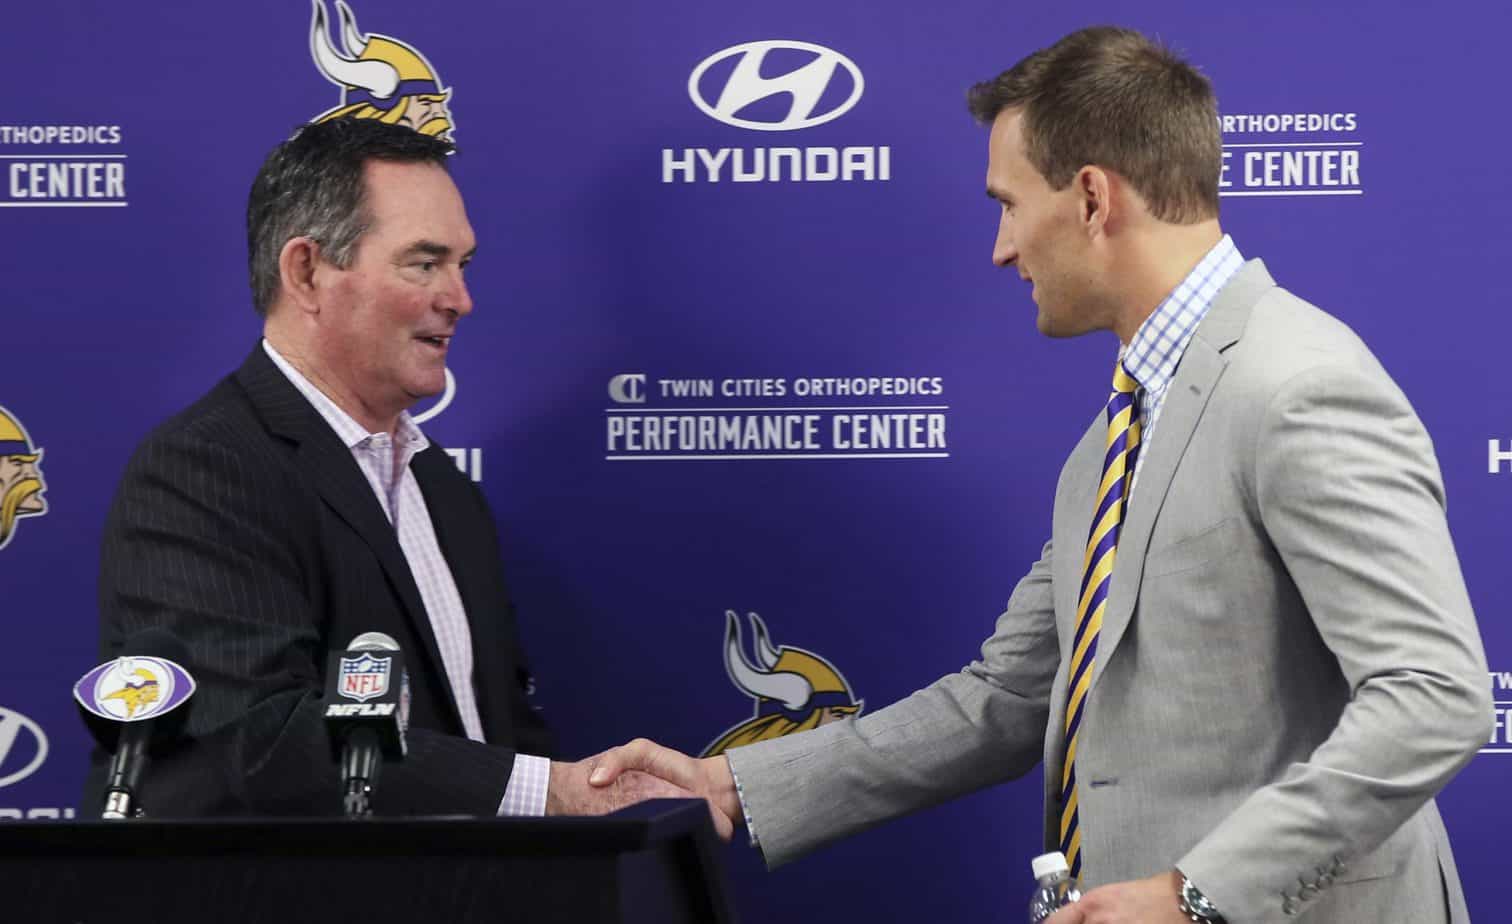 Minnesota Vikings head coach Mike Zimmer made an interesting revelation about his relationship with quarterback Kirk Cousins on Thursday